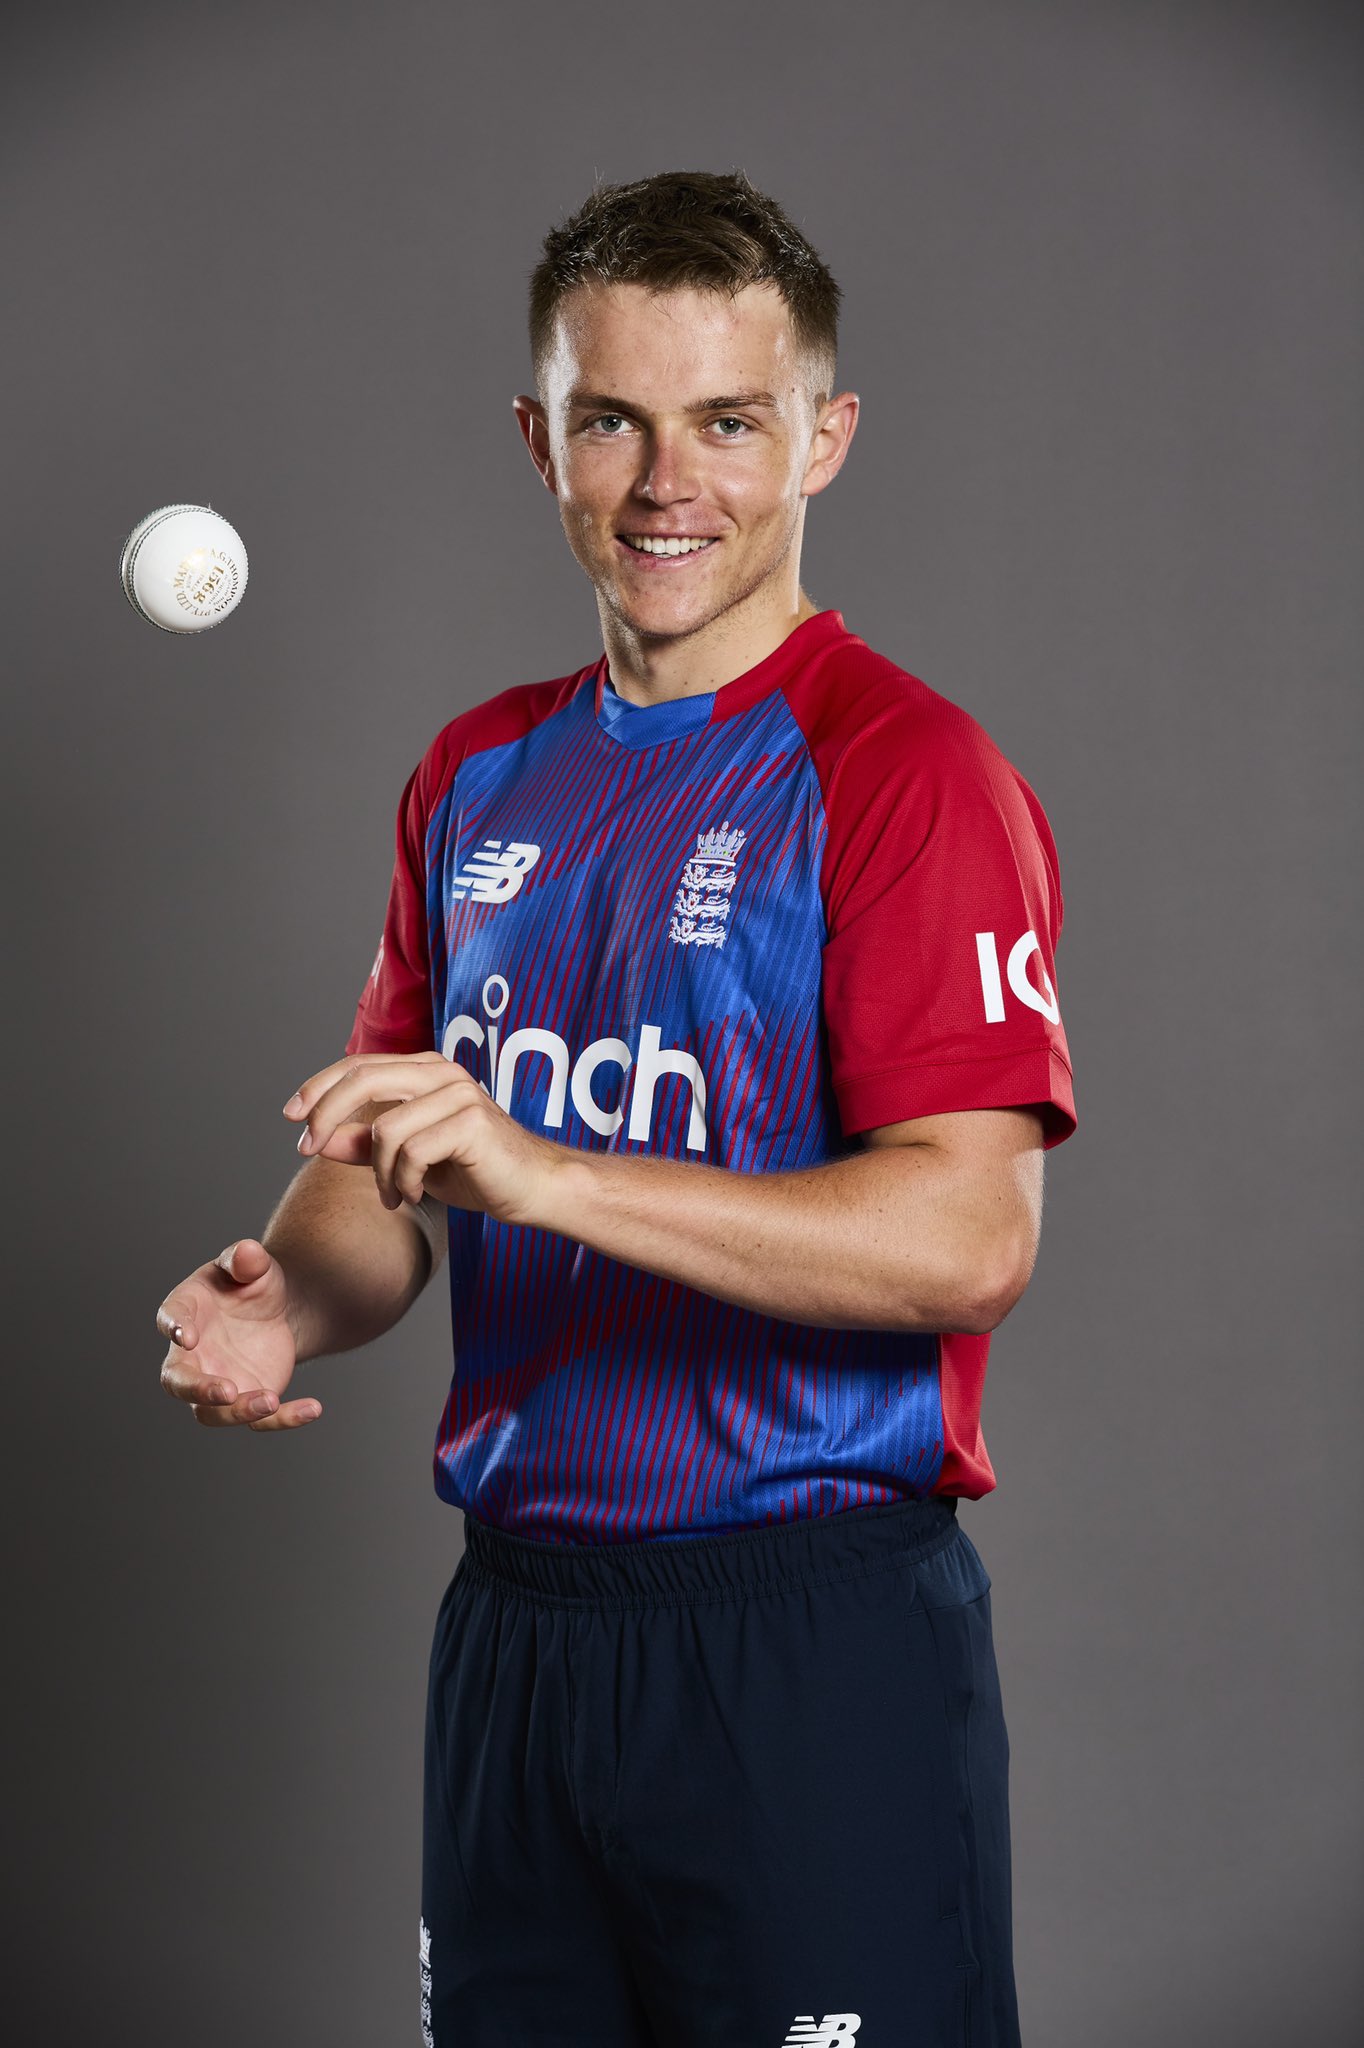 Sam Curran ruled out of T20 World Cup after suffering back injury during IPL game